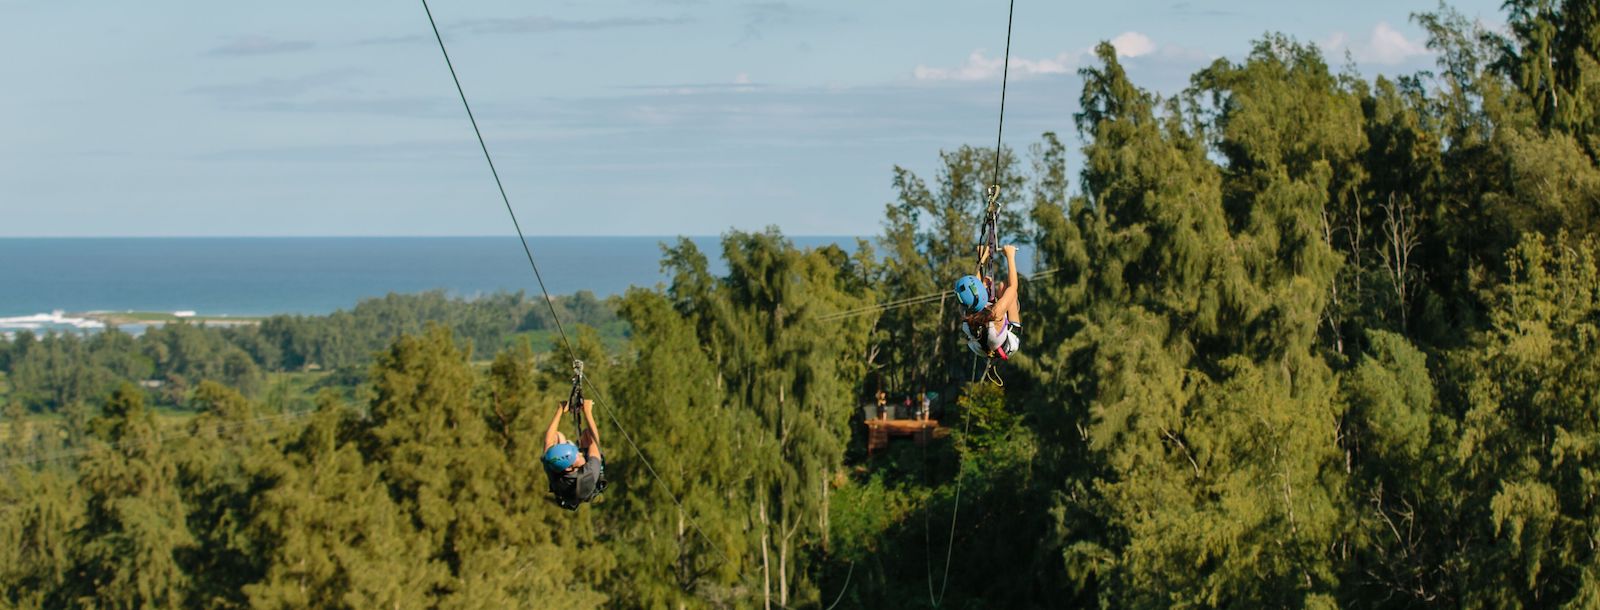 Top 5 Things to Know About Ziplining in Oahu With Kids